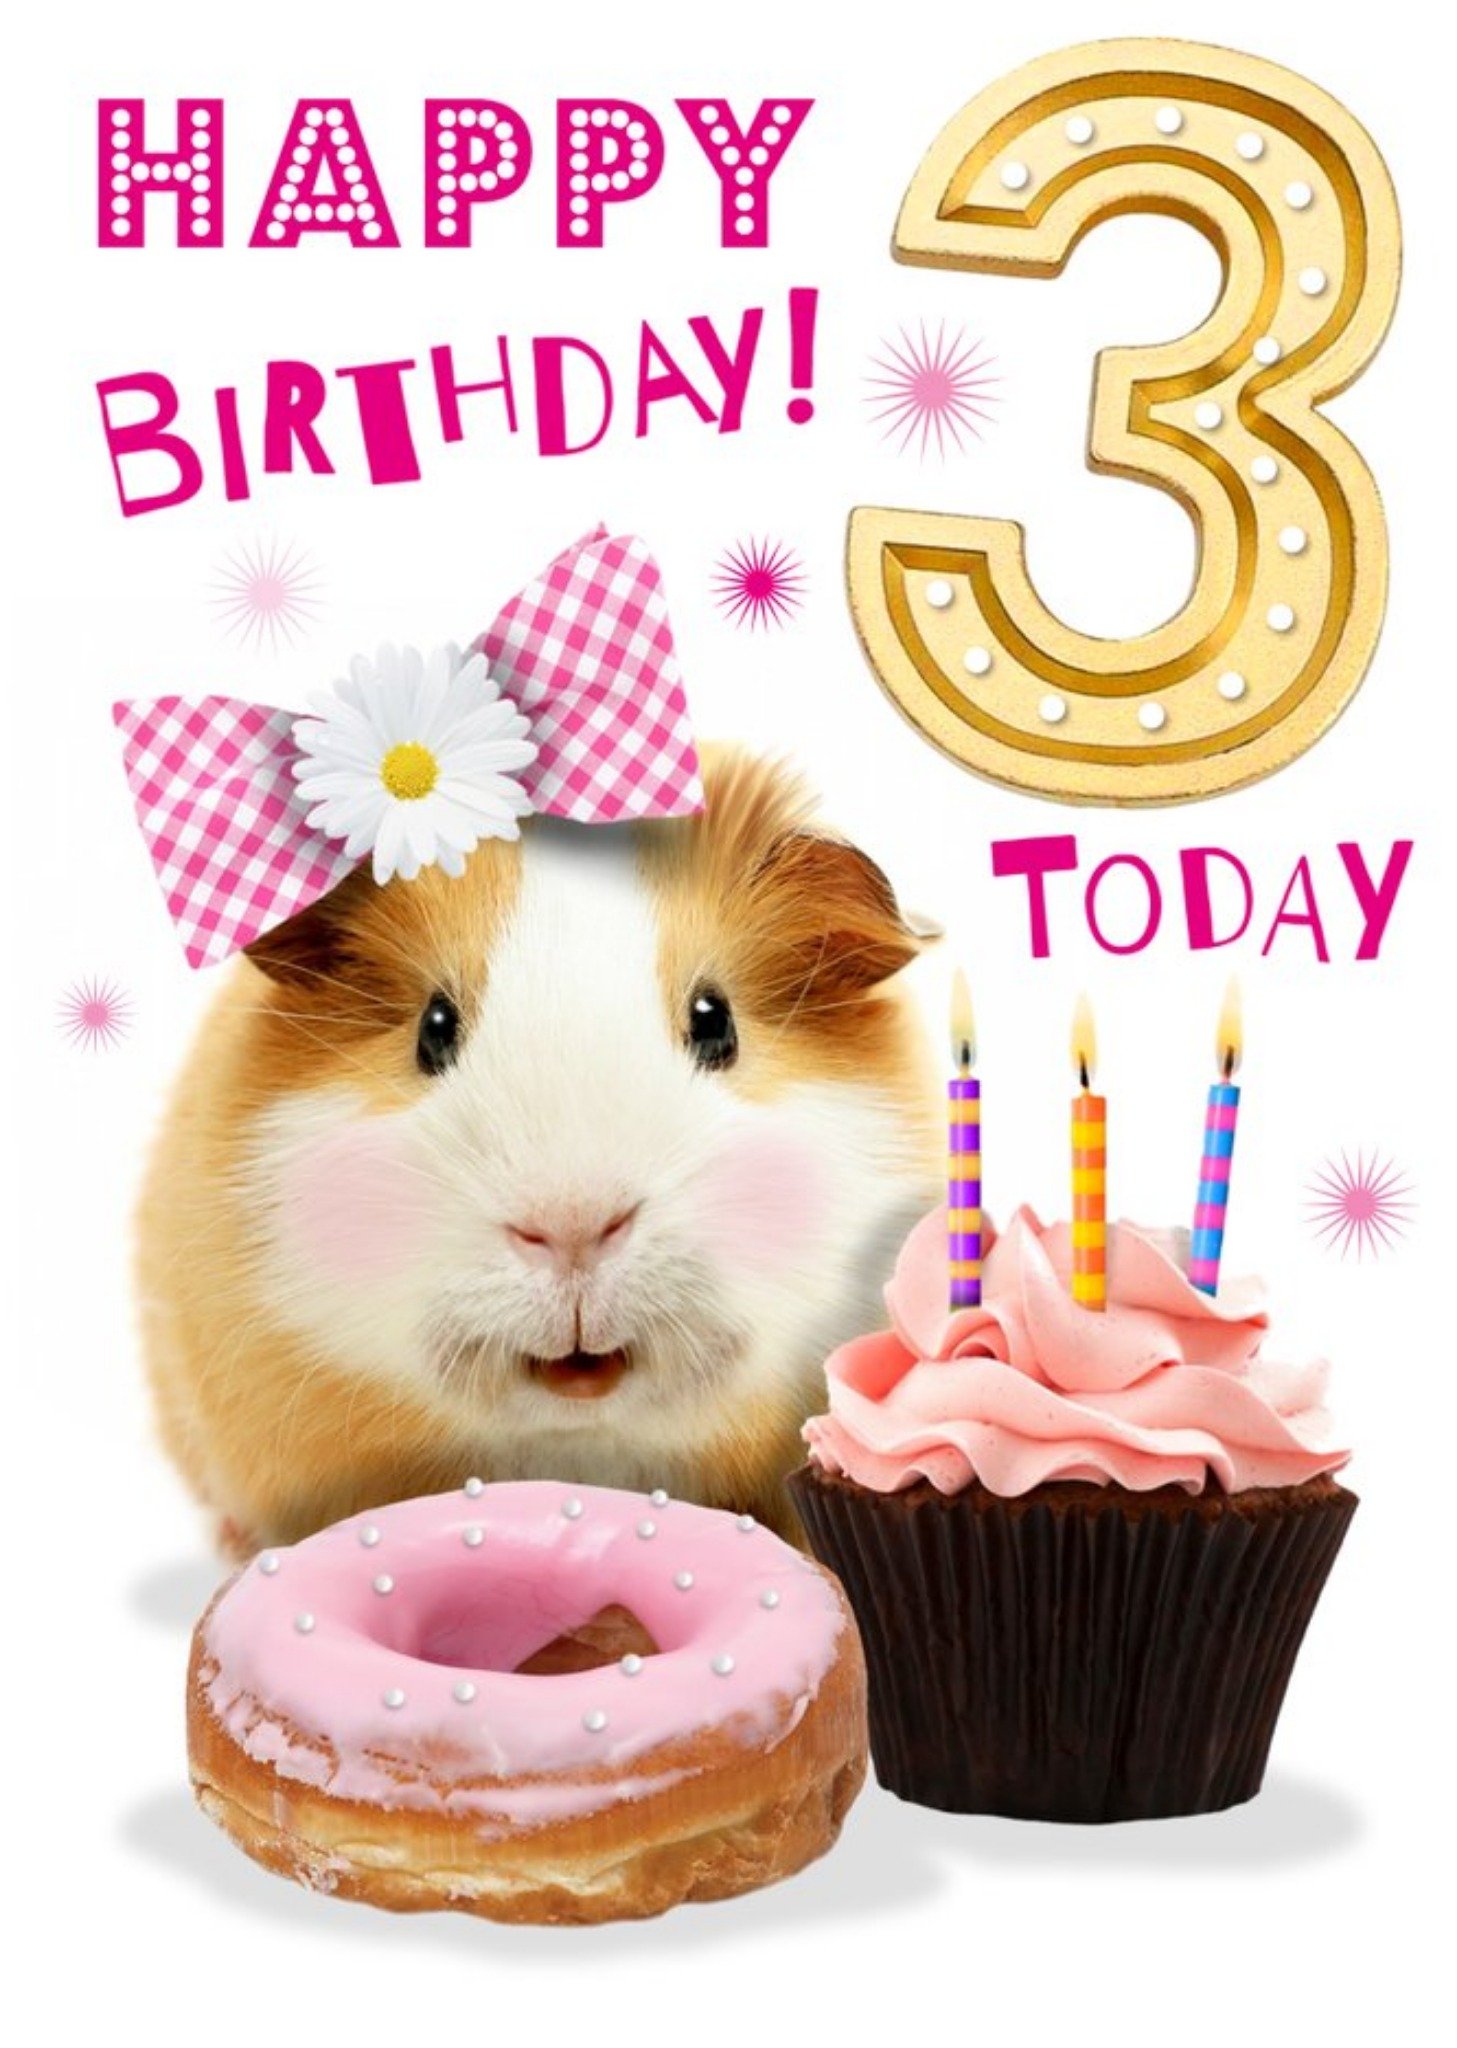 Moonpig Cute Guinea Pig With Cupcake 3rd Birthday Card, Large